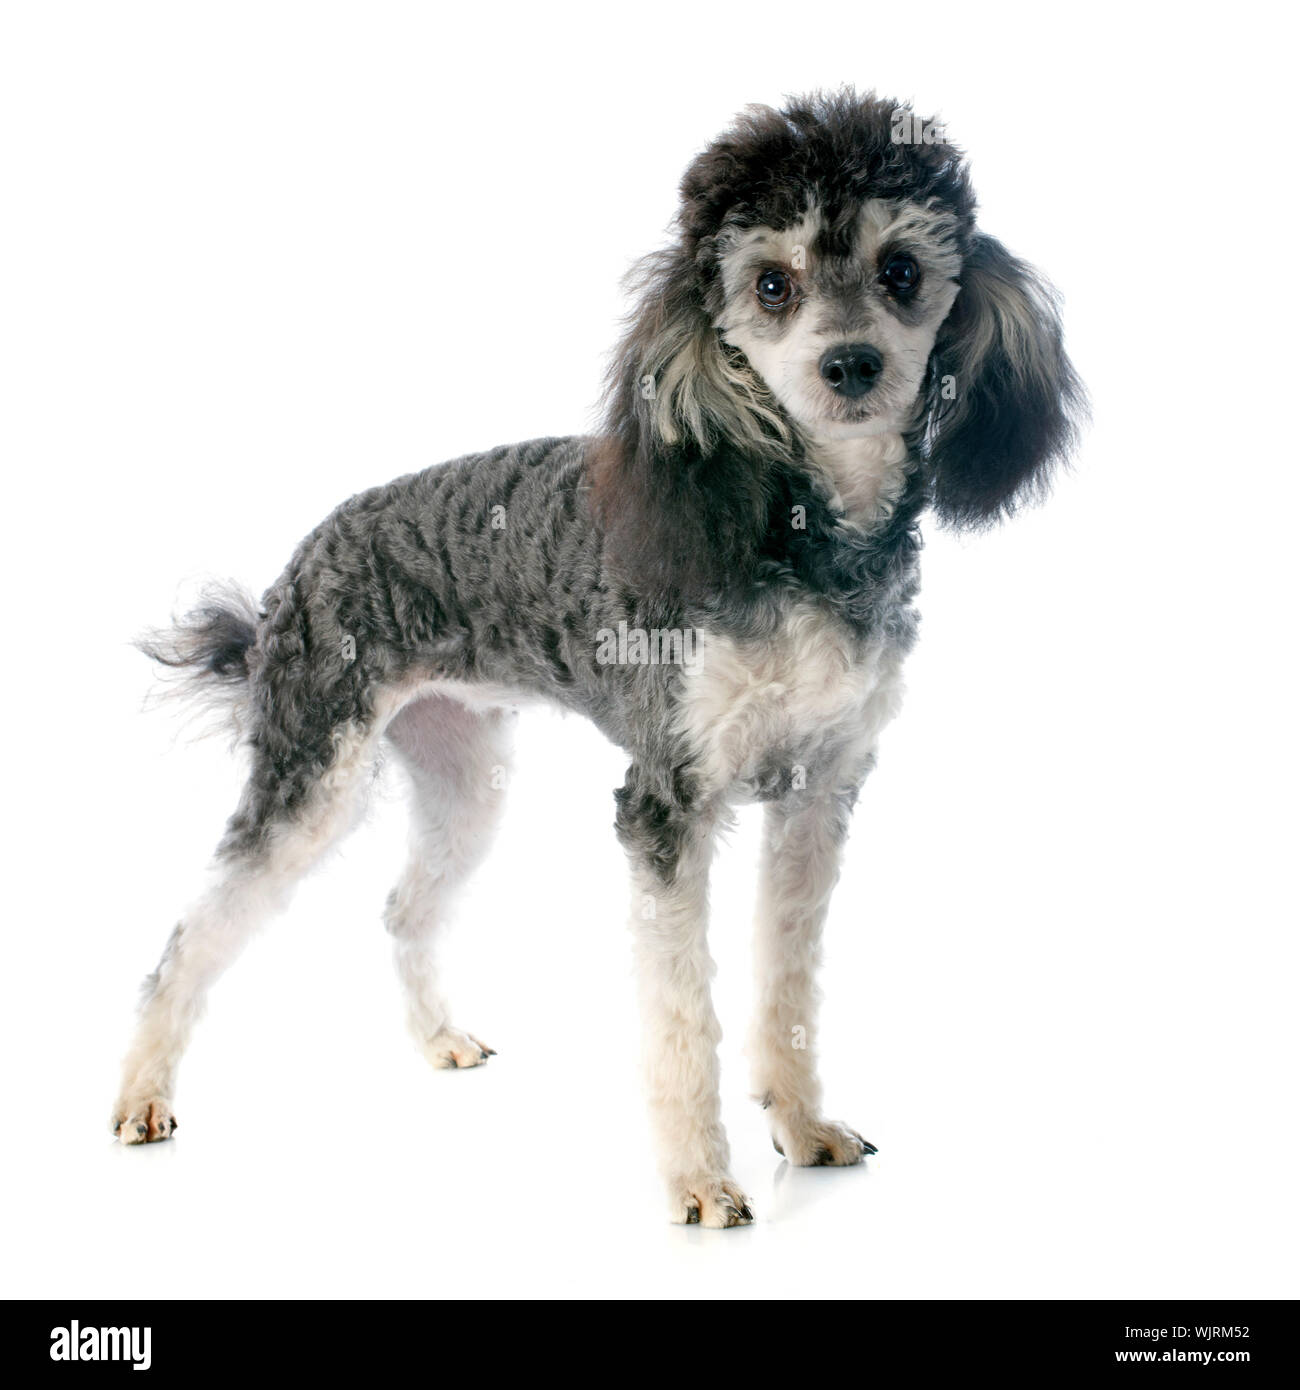 bicolor poodle in front of a white background Stock Photo